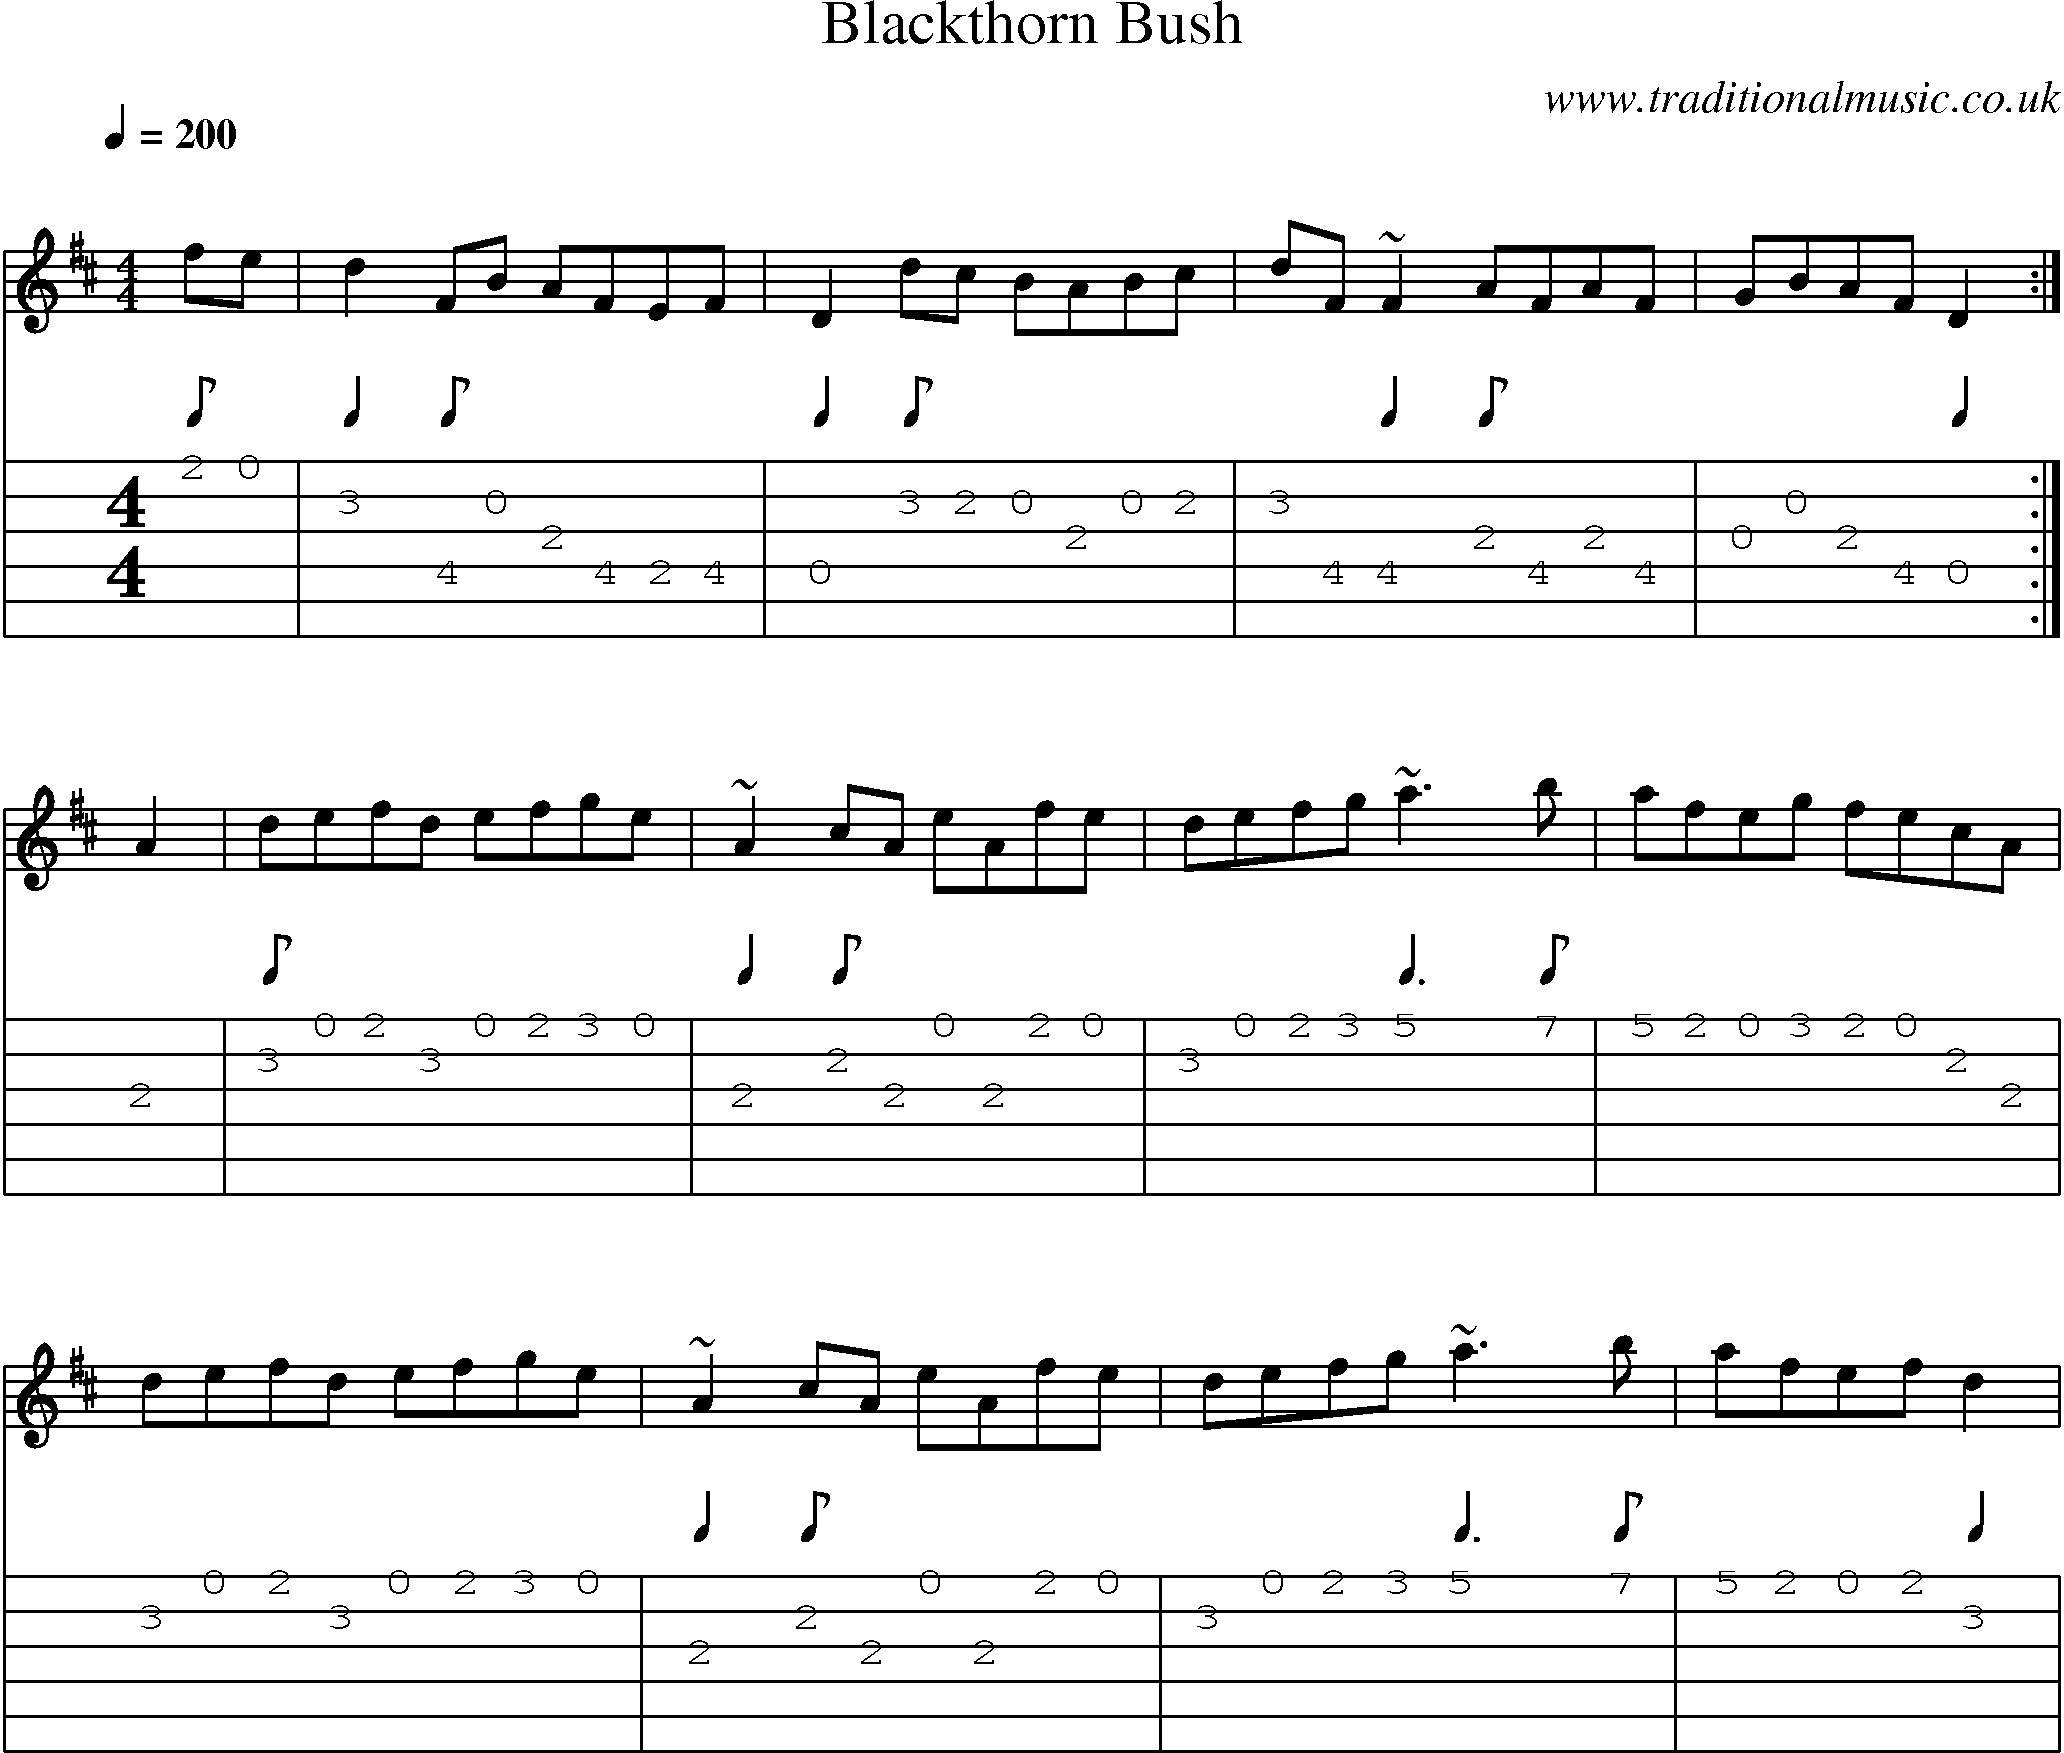 Music Score and Guitar Tabs for Blackthorn Bush